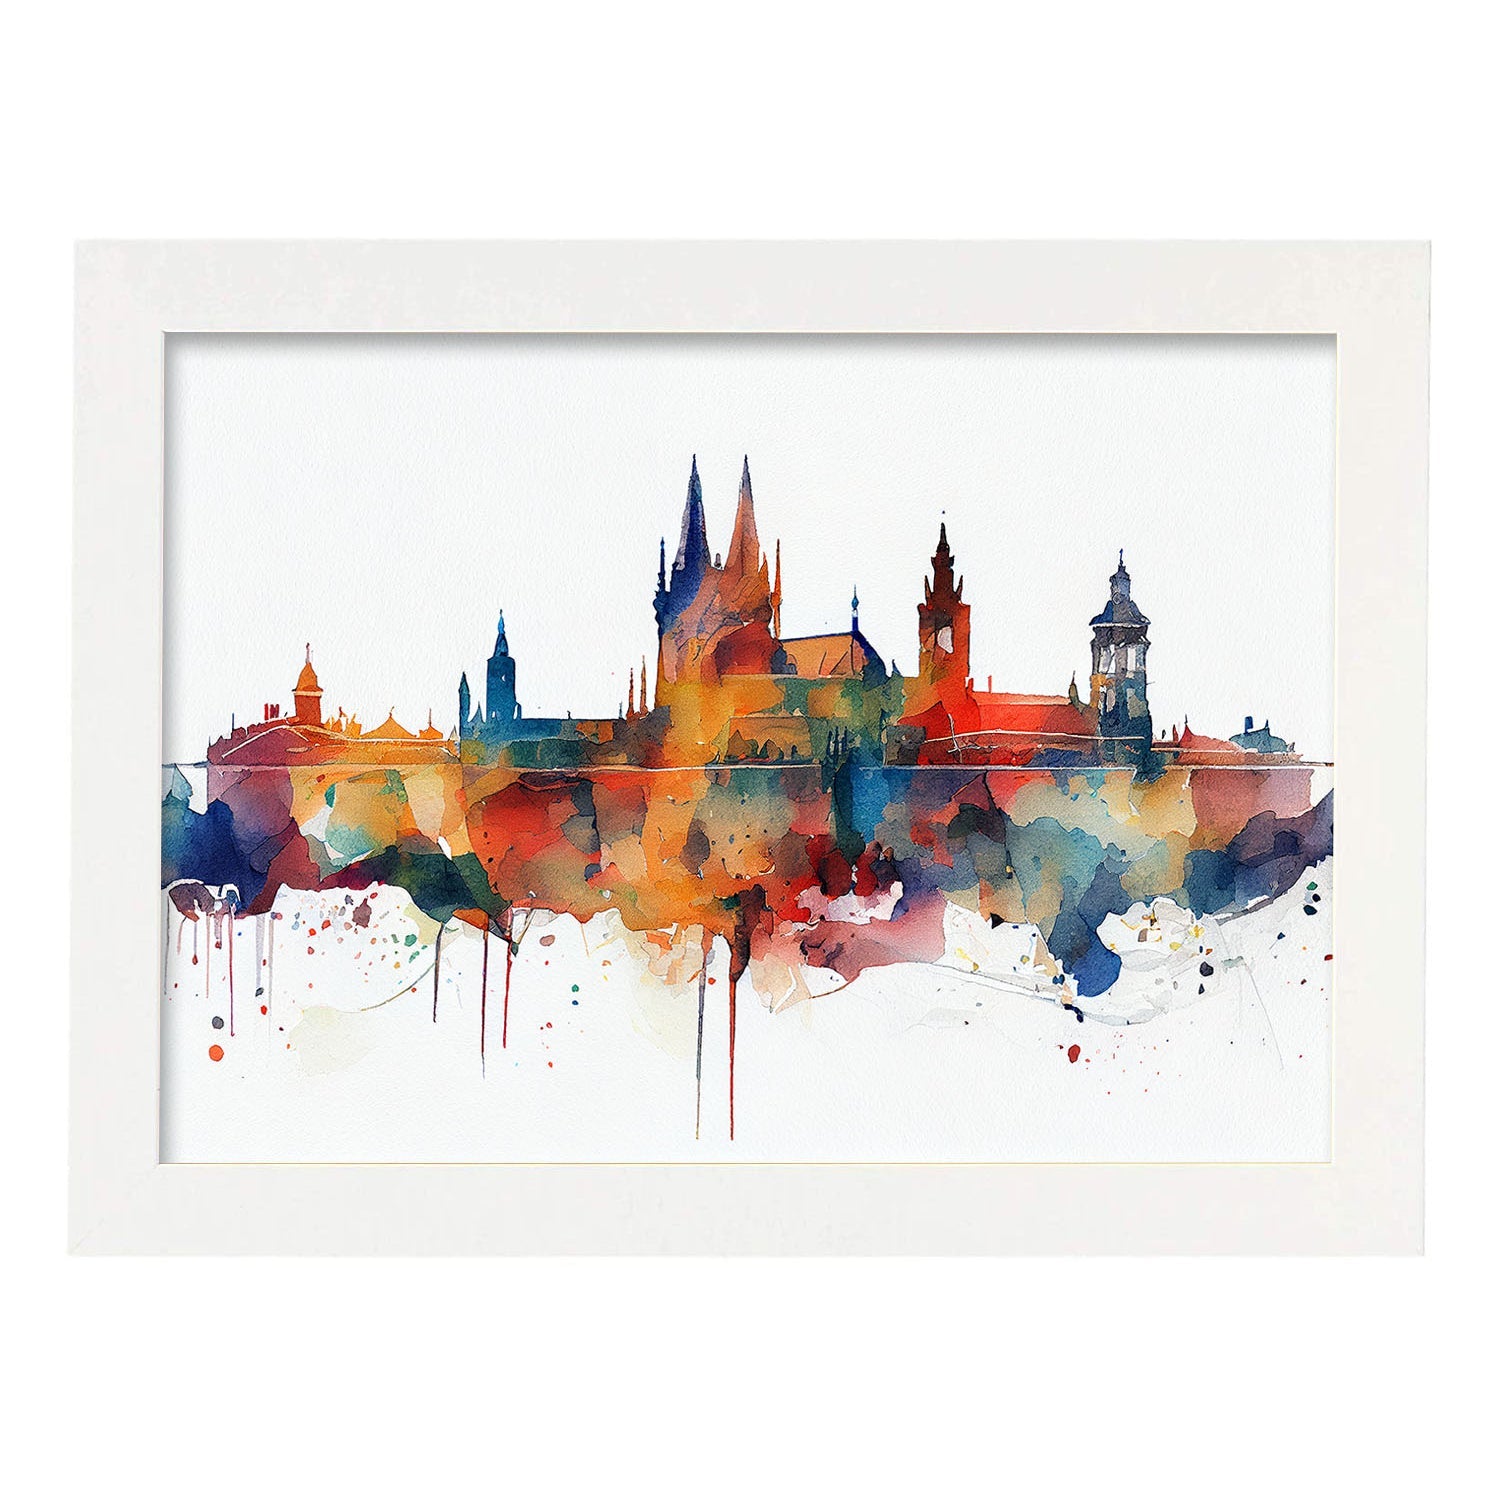 Nacnic watercolor of a skyline of the city of Prague_4. Aesthetic Wall Art Prints for Bedroom or Living Room Design.-Artwork-Nacnic-A4-Marco Blanco-Nacnic Estudio SL